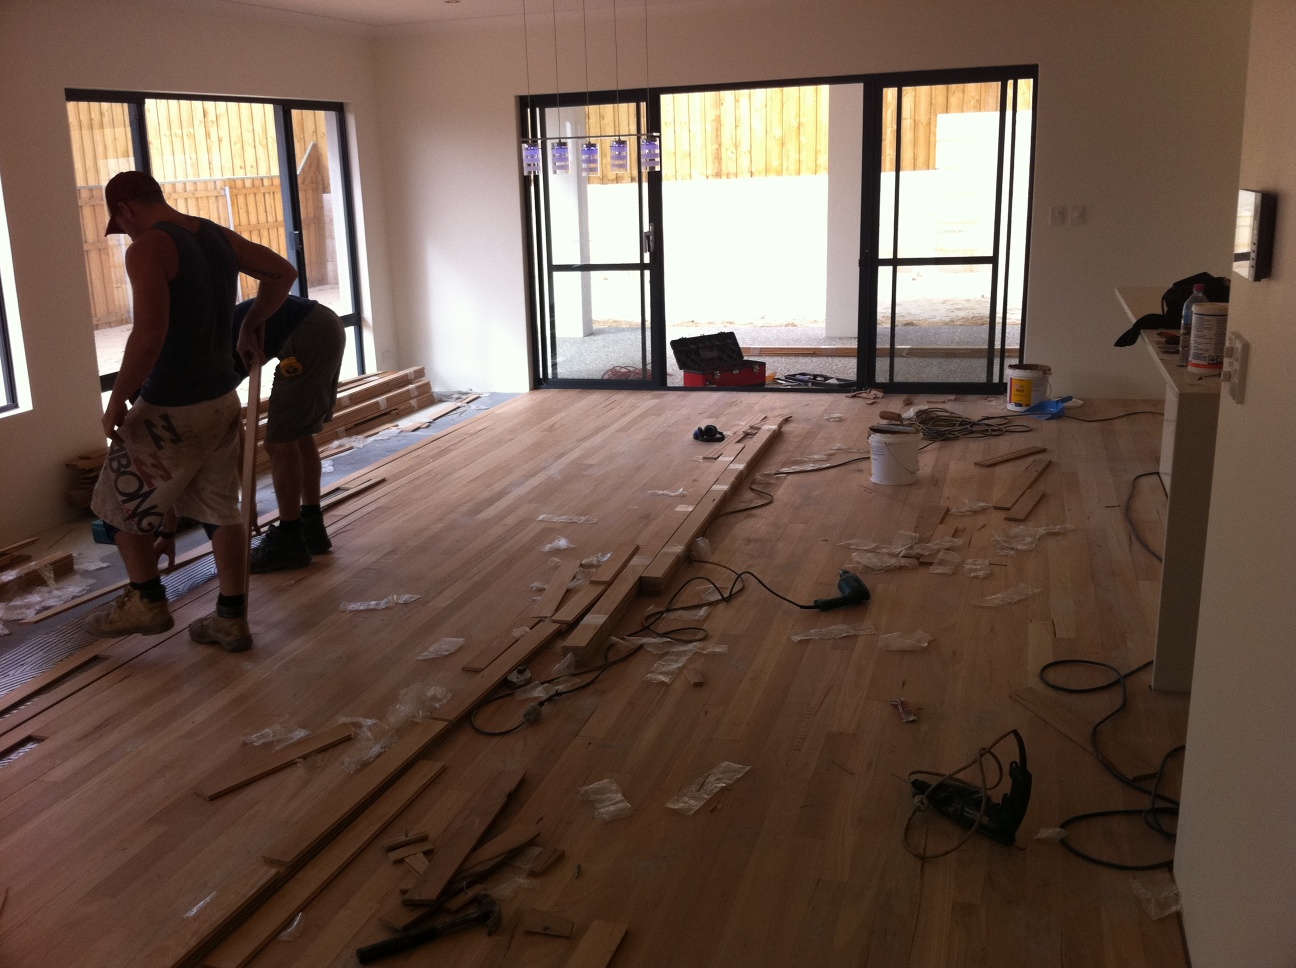 Our little part of Australia: Timber Flooring install - 20/04/11